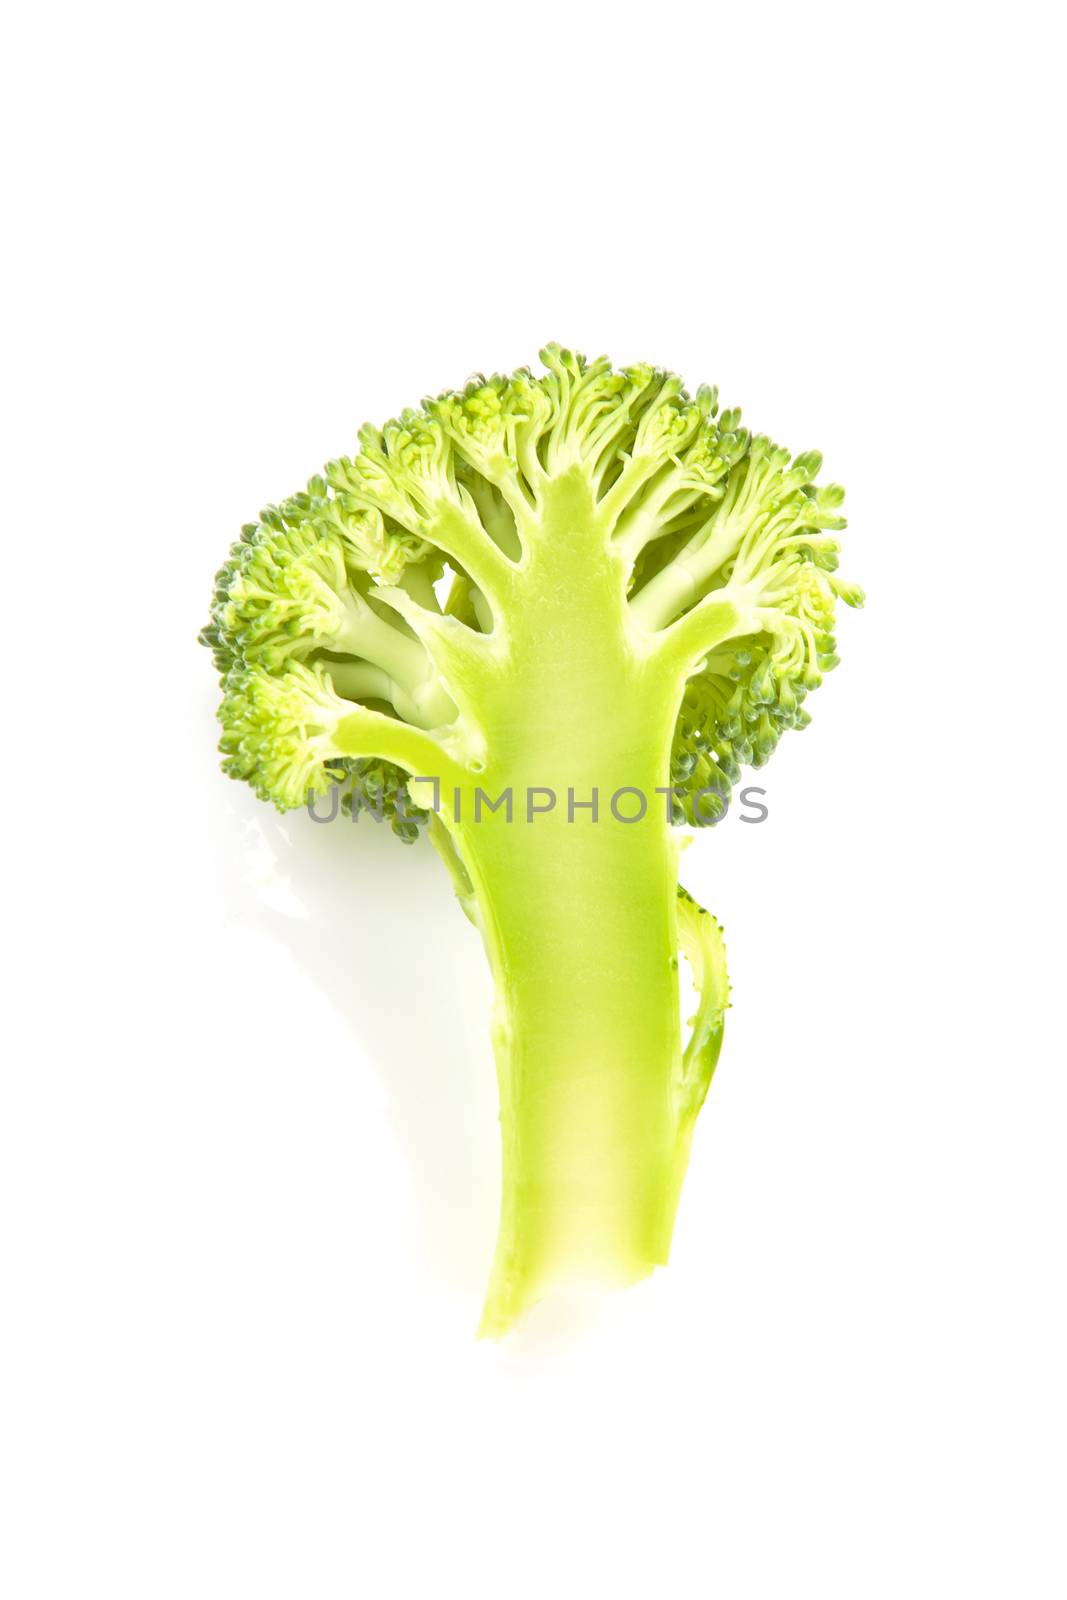 Broccoli piece section isolated on white background.